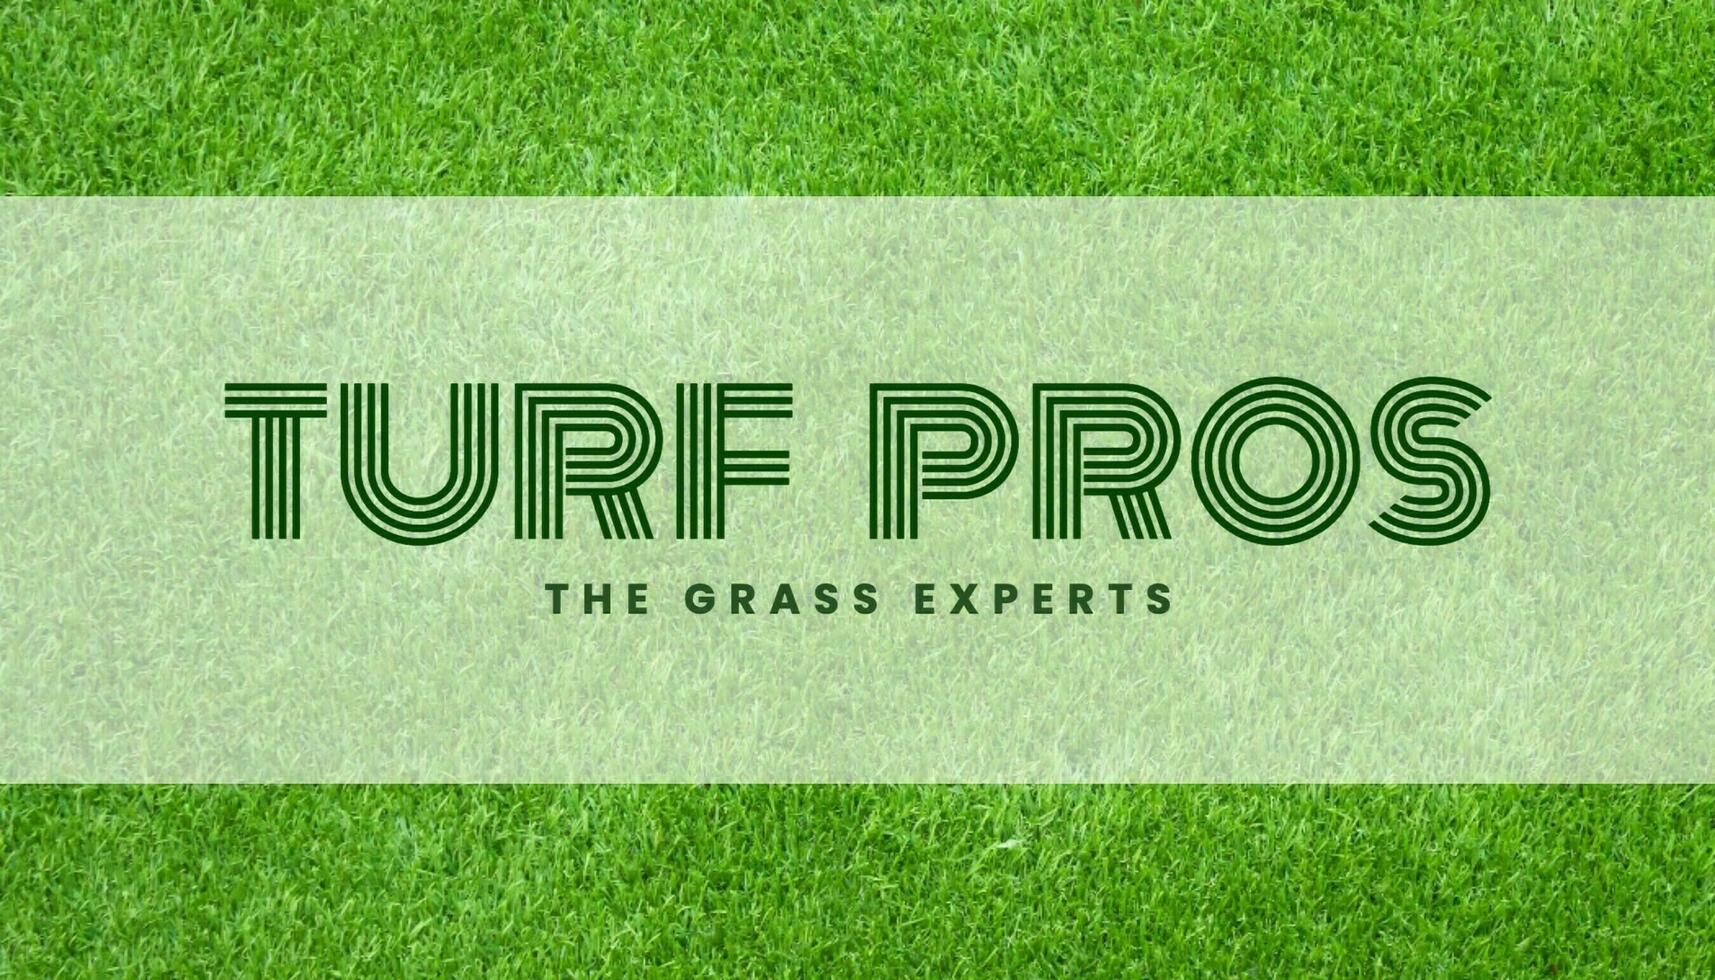 Turf Pros Lawn & Landscaping Business Card Template